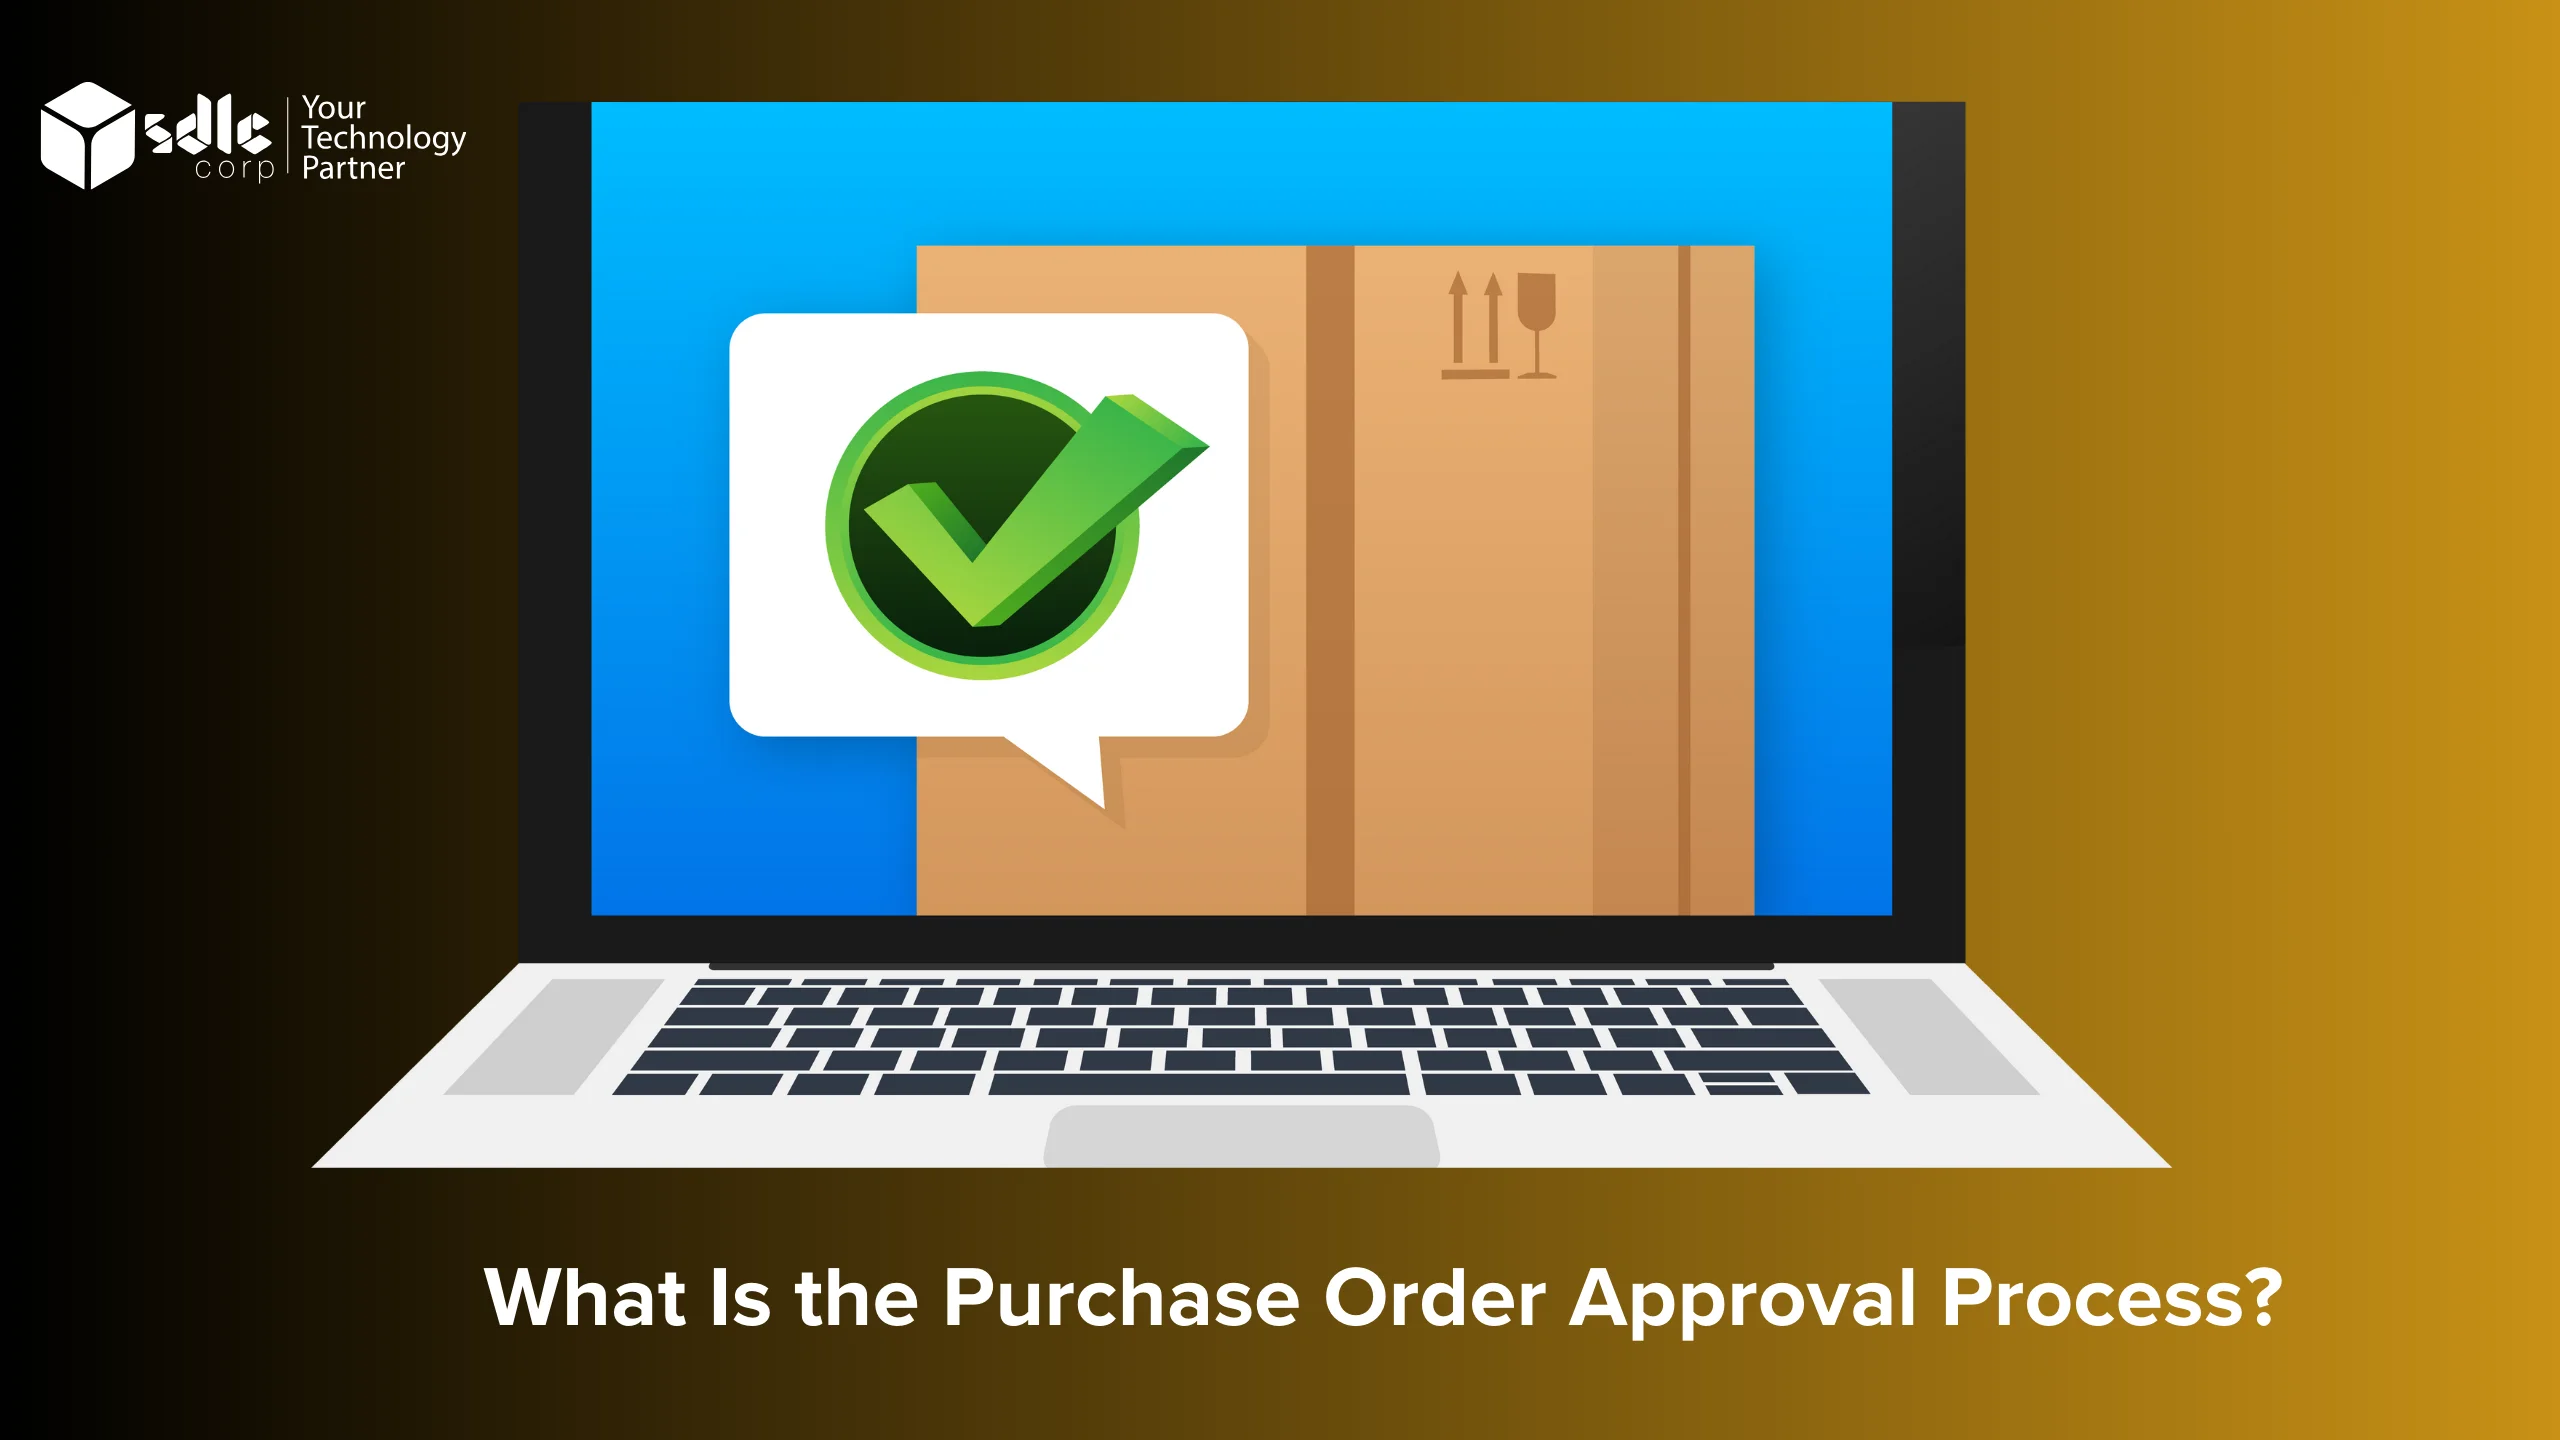 What Is the Purchase Order Approval Process